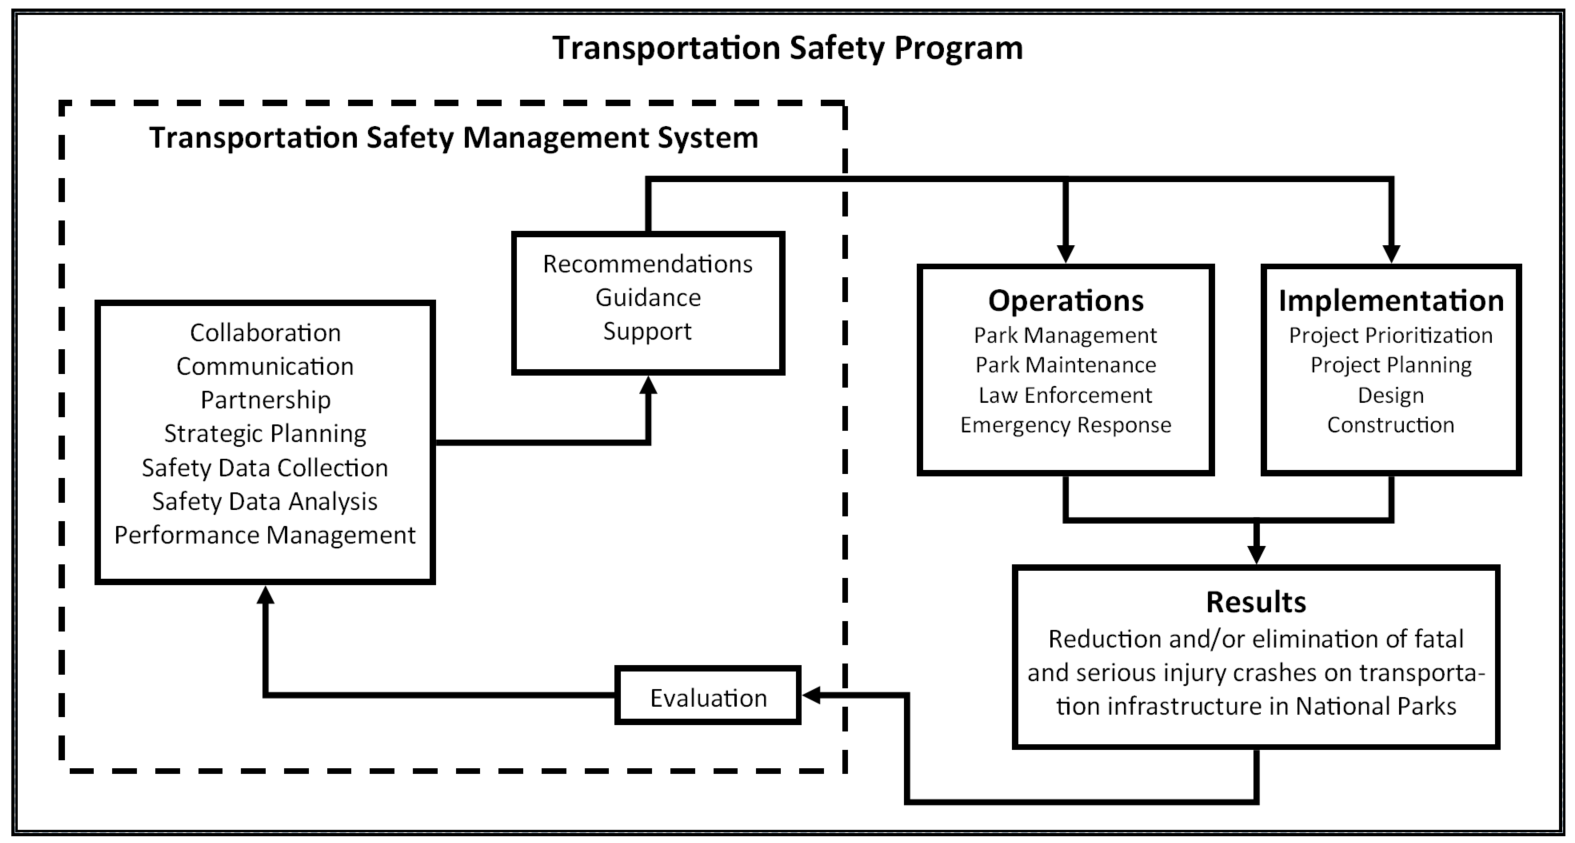 Graph:Evaluation to Collaboration/Communication/Partnership/Strategic Planning/Safety Data Collection/Safety Data Analysis/Performance Management to Recommendations/Guidance/Support to Operations and Implementation lead to Results back to Evaluation